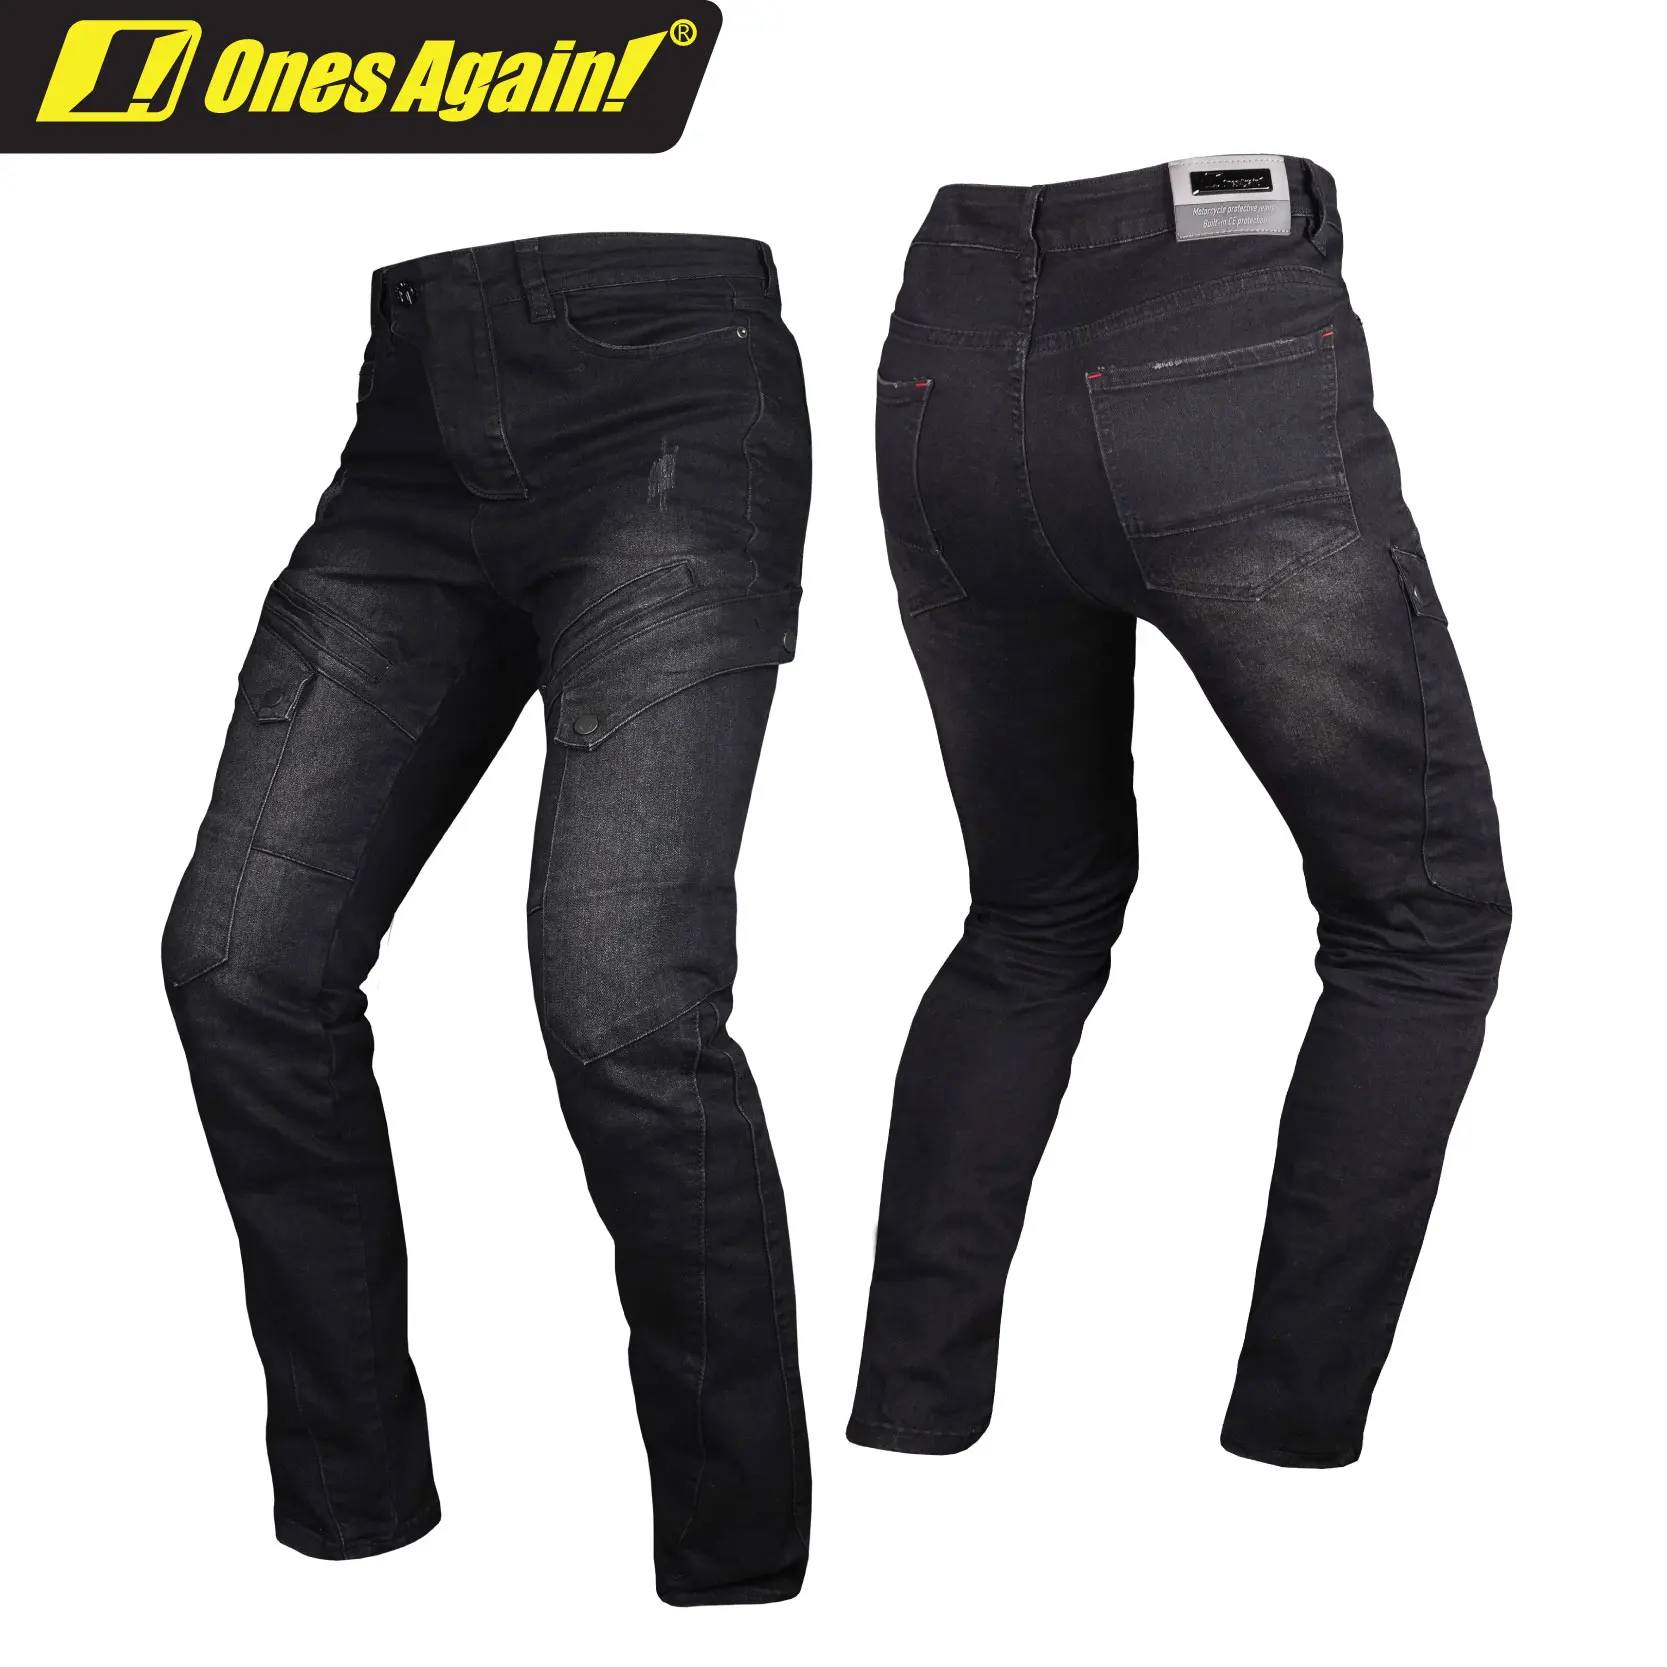 

Summer Motorcycle Pants Men Black Retro Biker Jeans Riding Trousers Wear-resistant Motorcycle Jeans with CE Approved Armor